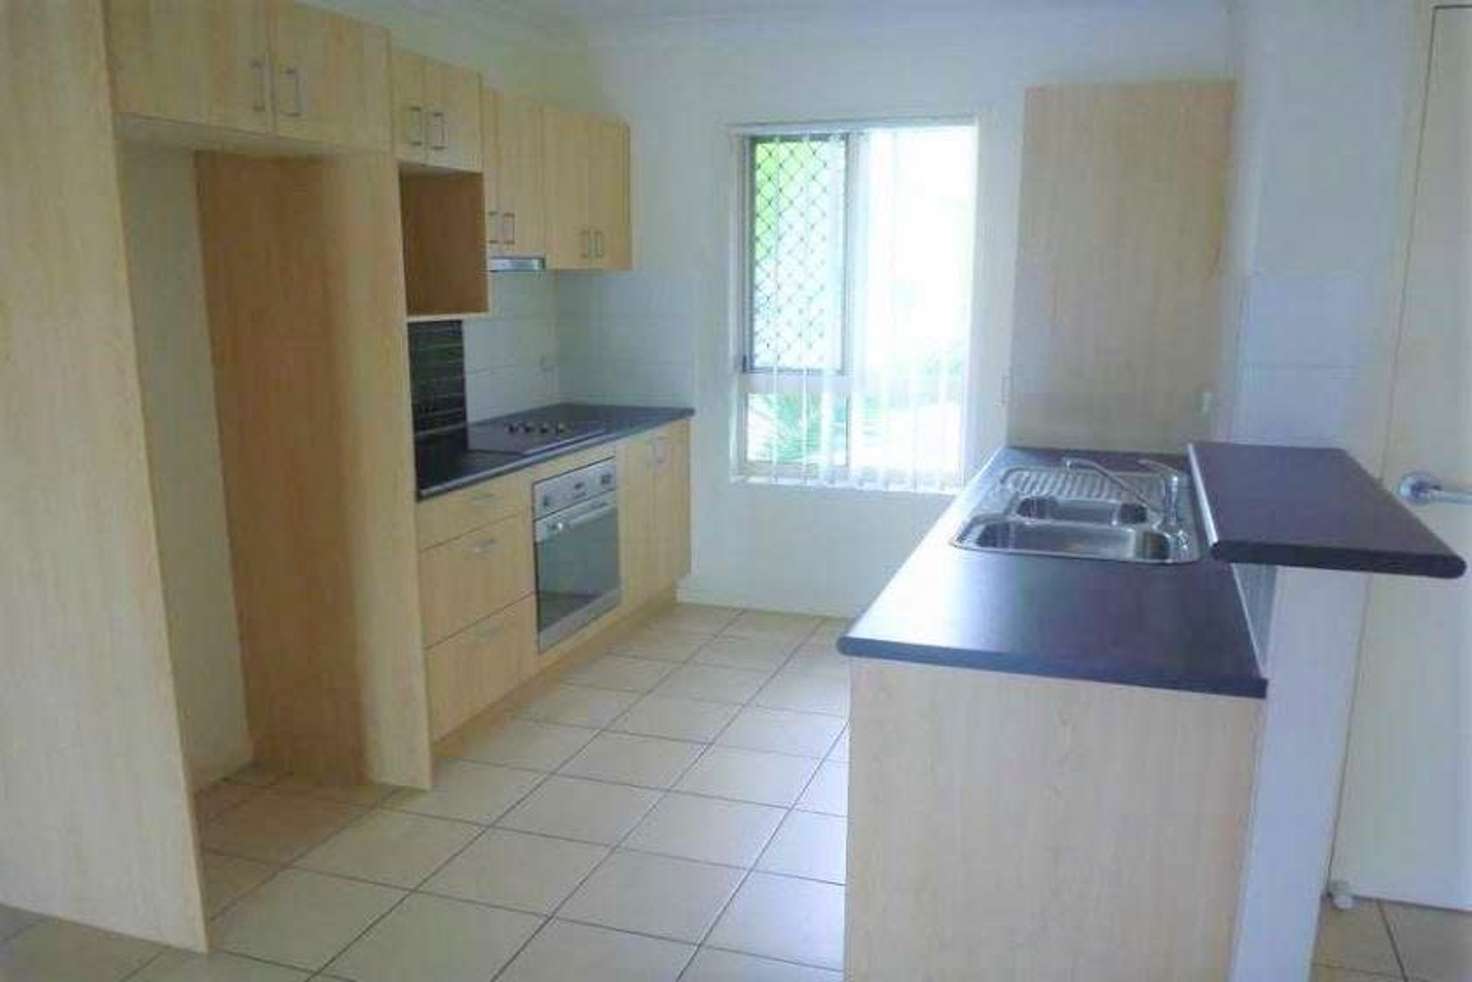 Main view of Homely unit listing, 5/356 Zillmere Rd, Zillmere QLD 4034